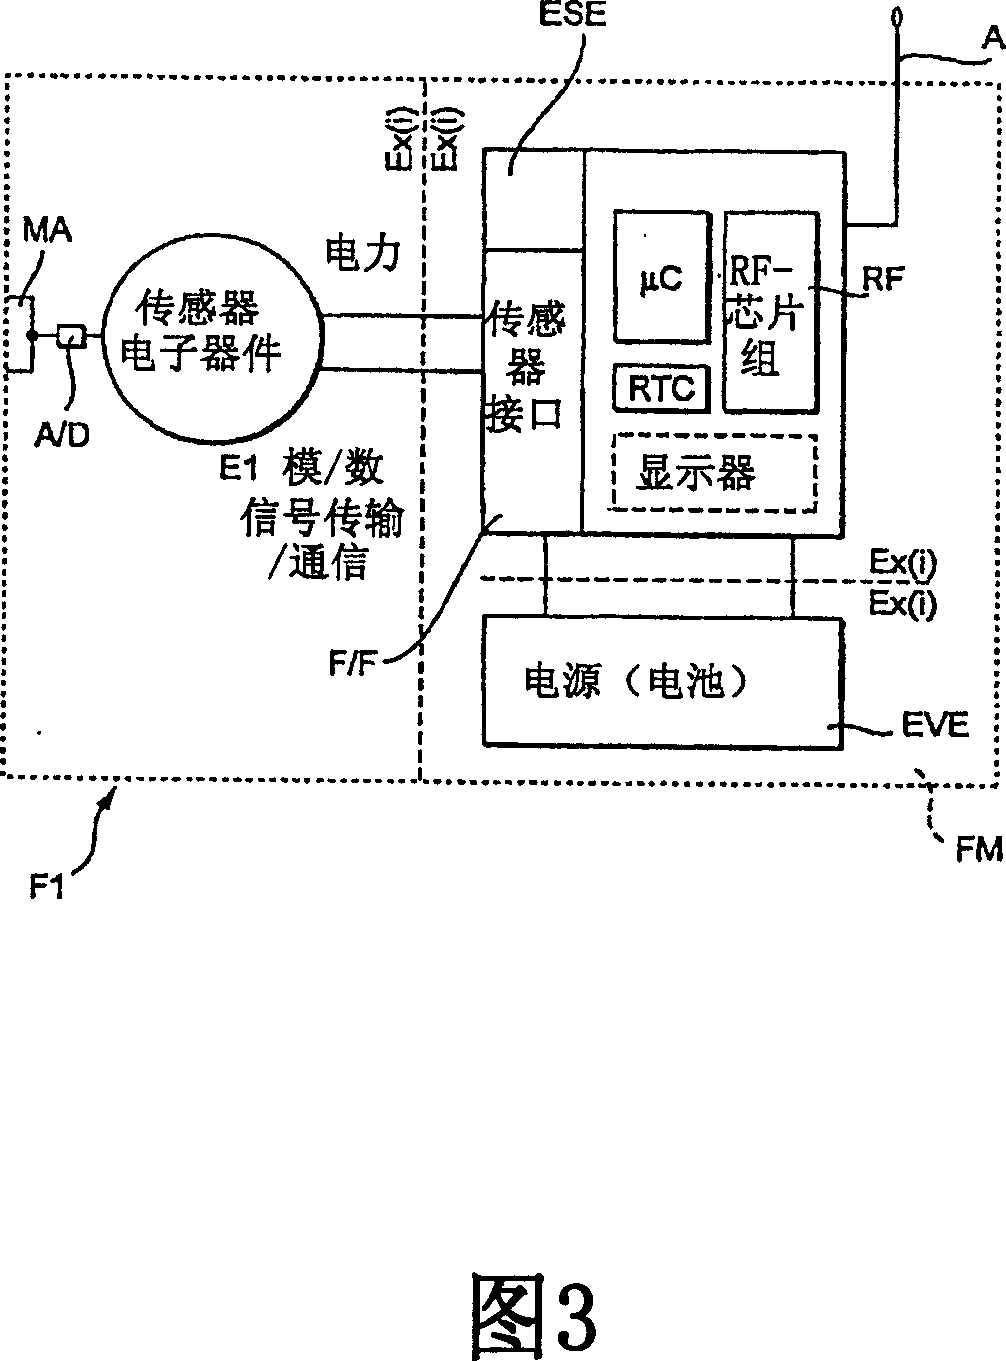 Radio module for field appliances used in automation systems